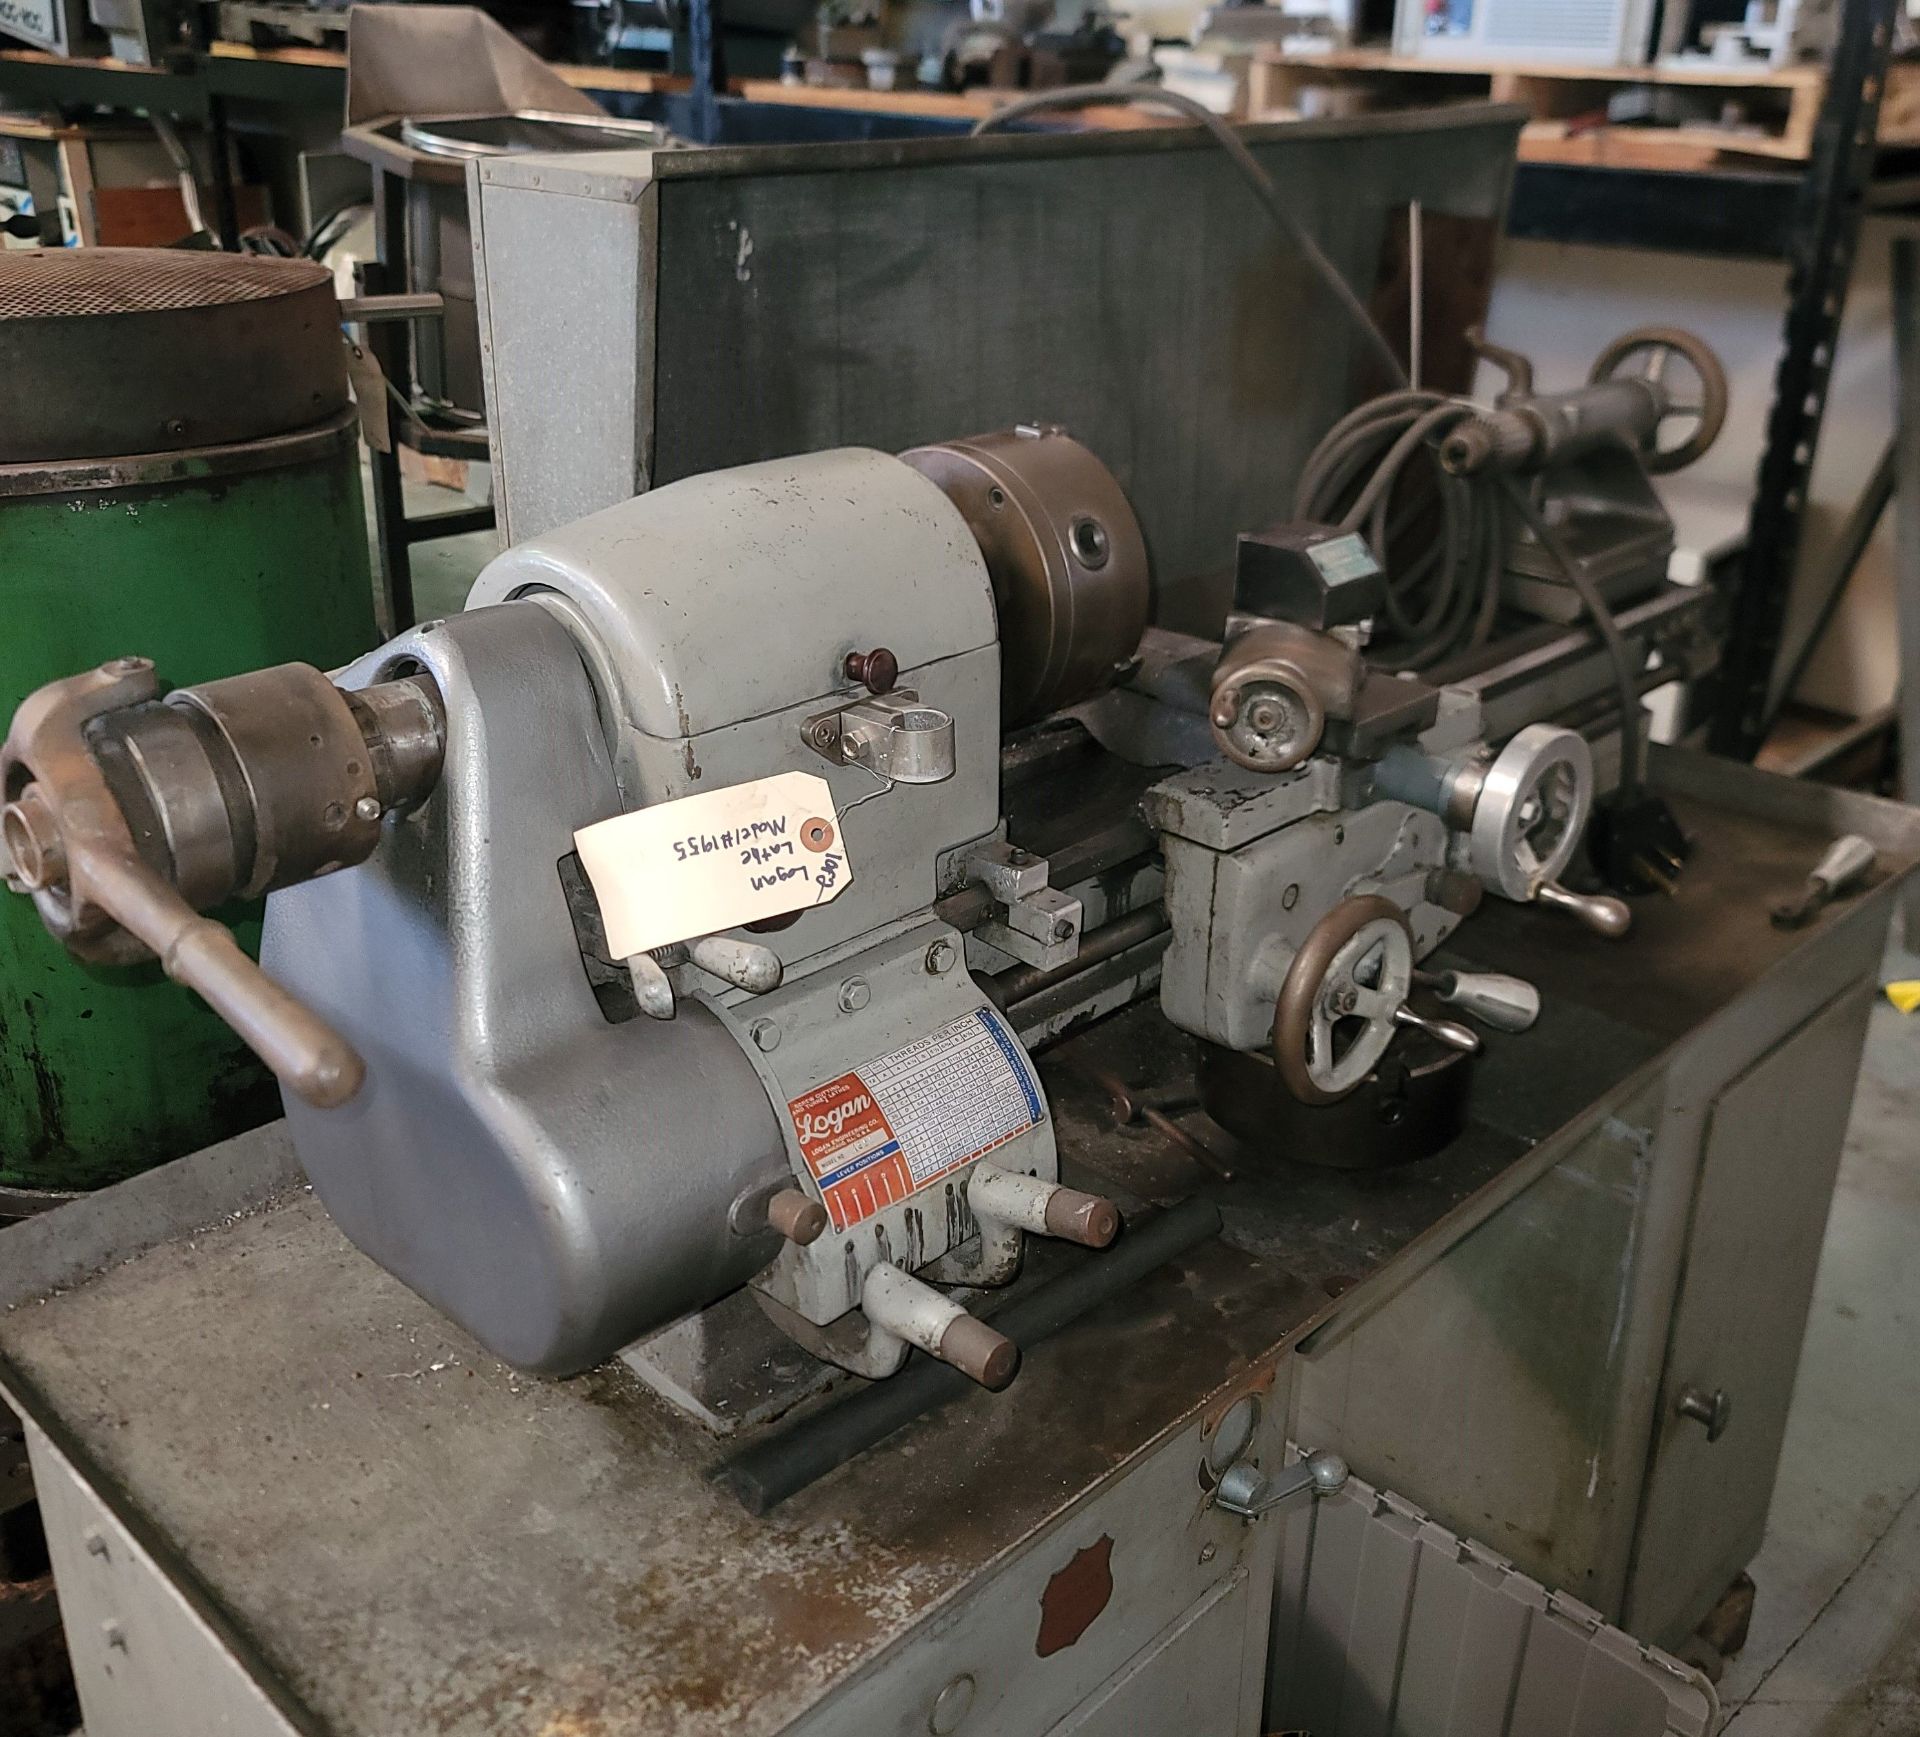 LOGAN MODEL 1955 LATHE, 6-1/2" 3-JAW CHUCK, 8" 4-JAW CHUCK, TAILSTOCK, W/ TOTE OF LATHE TOOLS AND 5C - Image 2 of 7